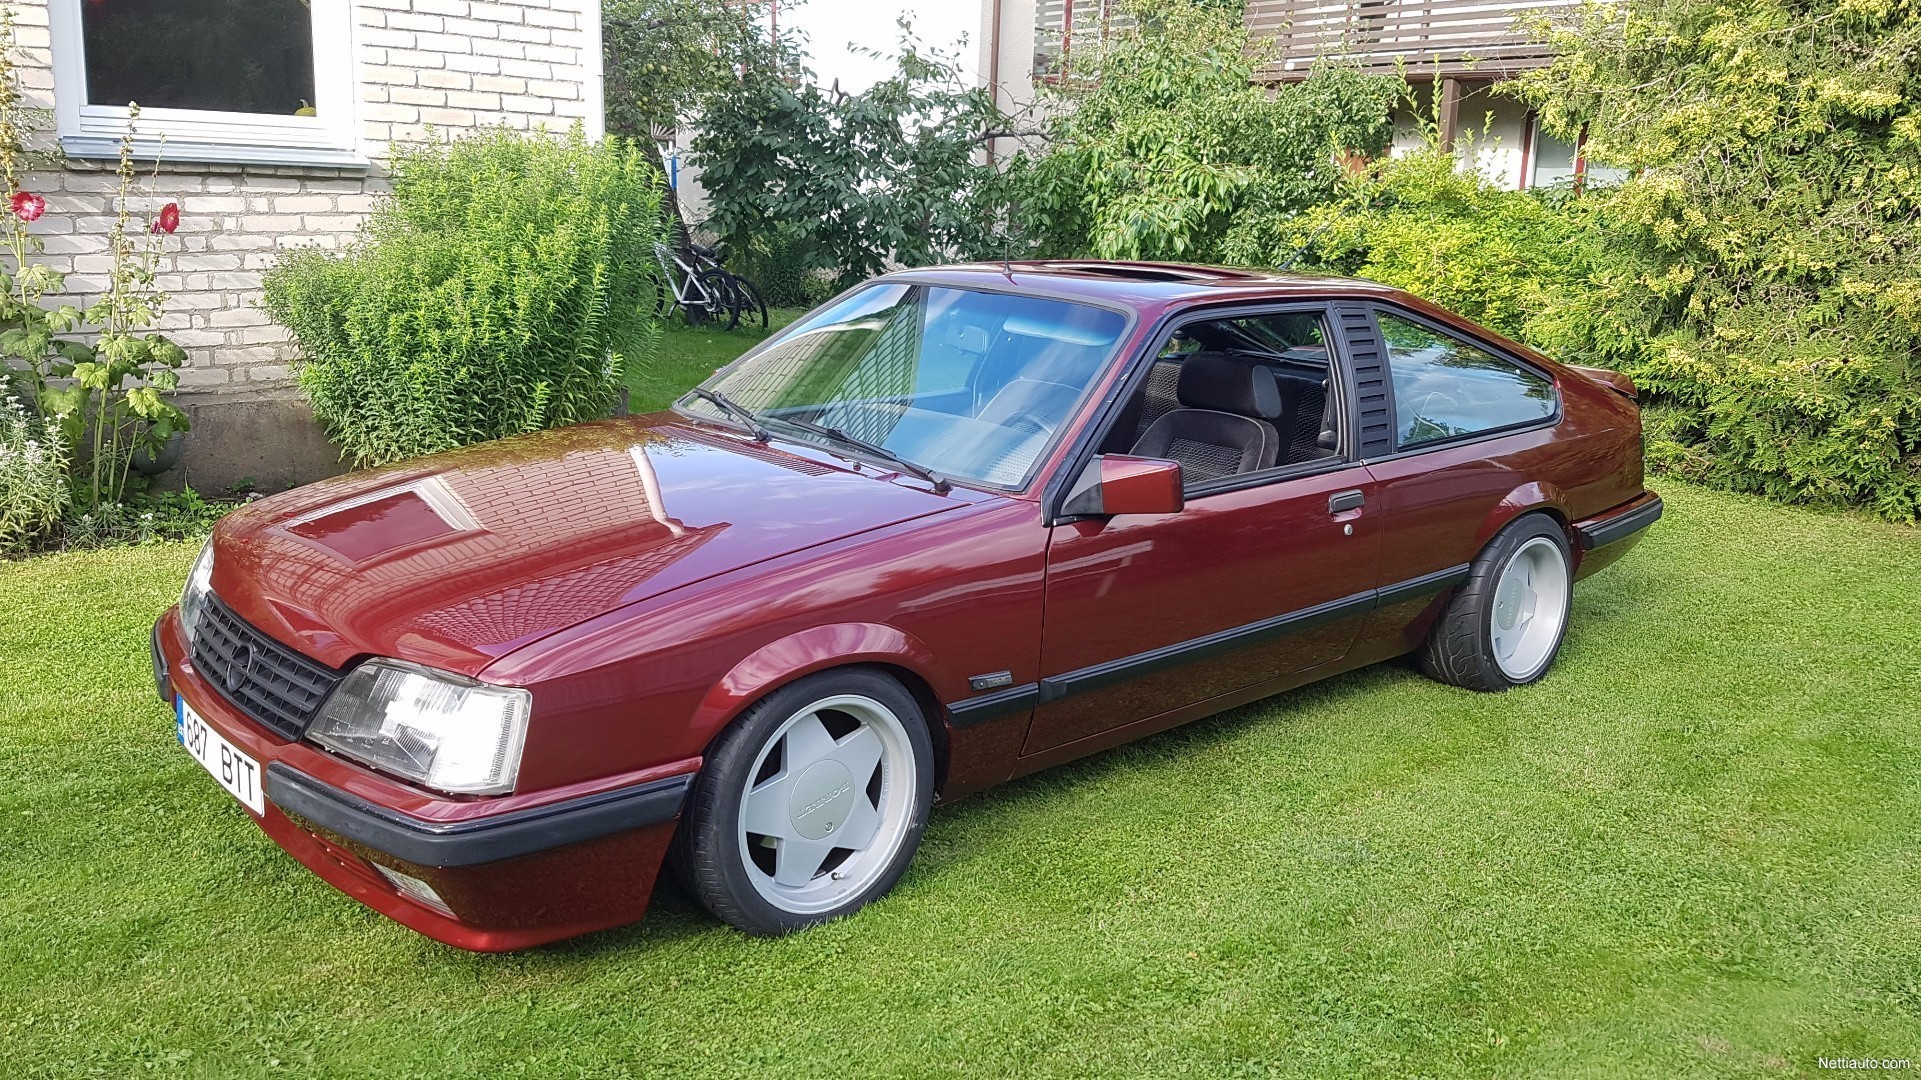 Opel-Monza-8bf8fcad2d6a177c-large.jpg